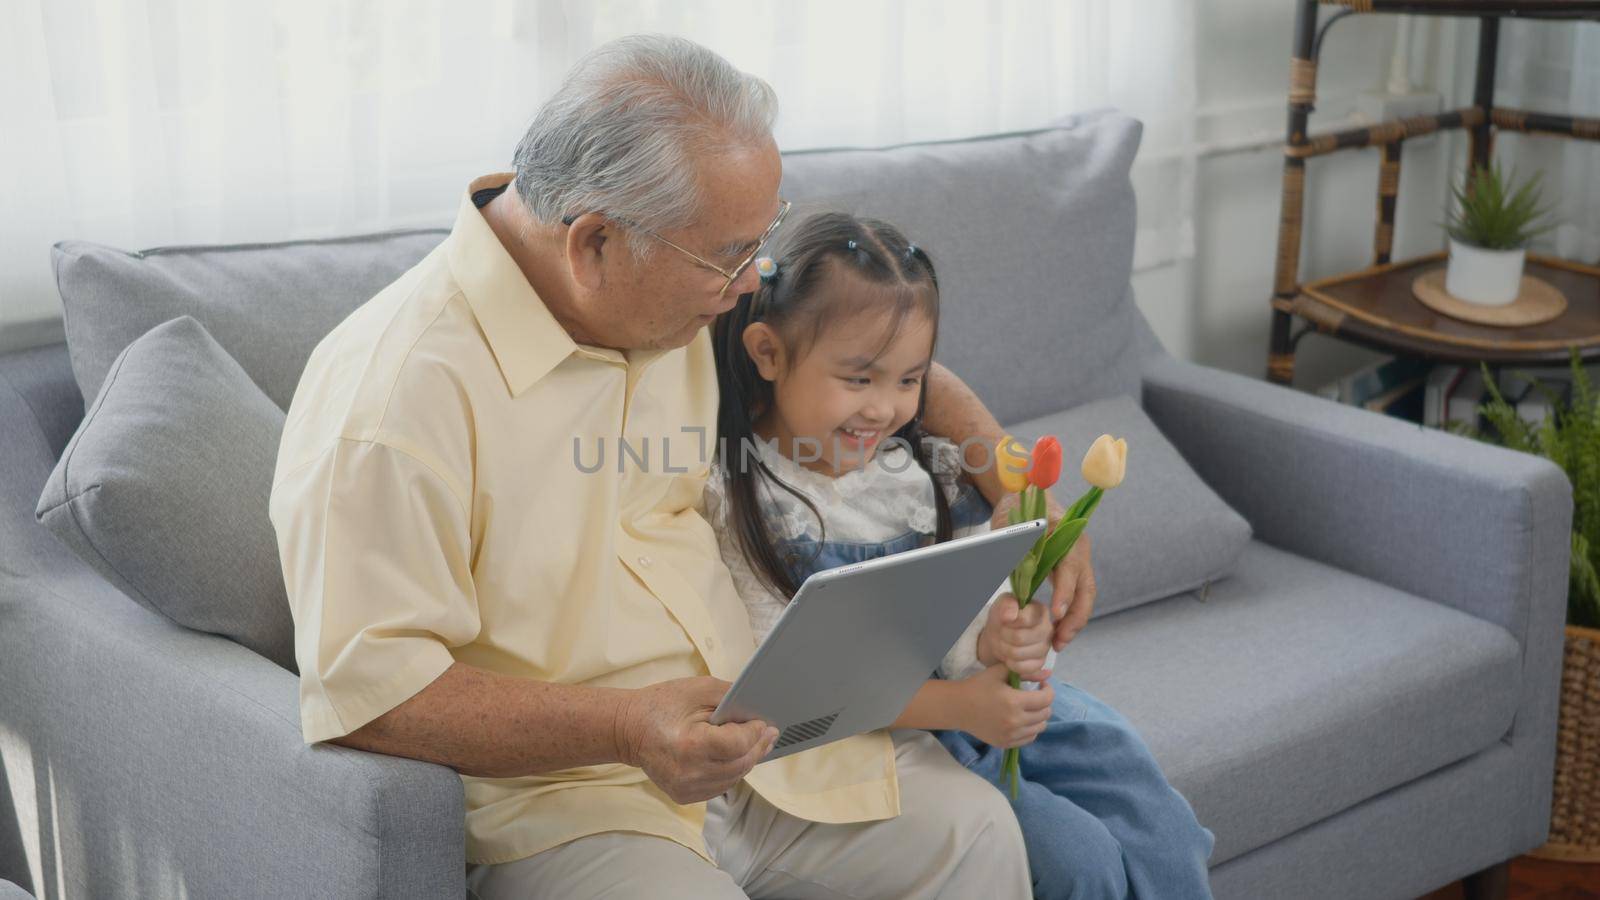 Asian senior old man looking to tablet computer and granddaughter come visitor at home, Grandfather reading news on digital tablet with his kid on sofa in living room